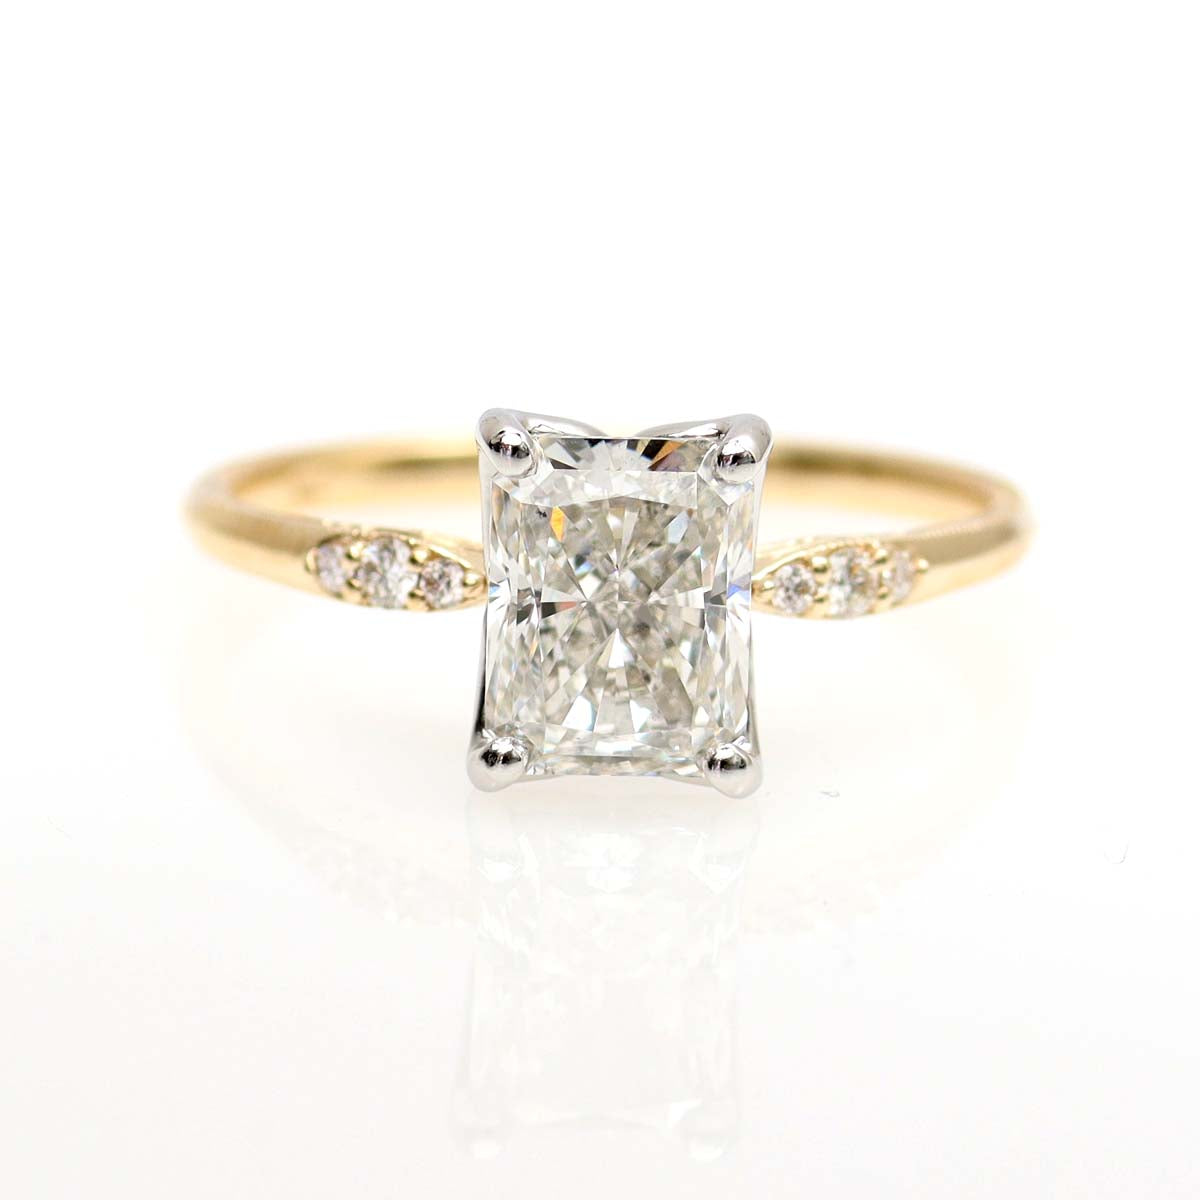 The Adrienne Edwardian Revival Engagement Ring #3616-1